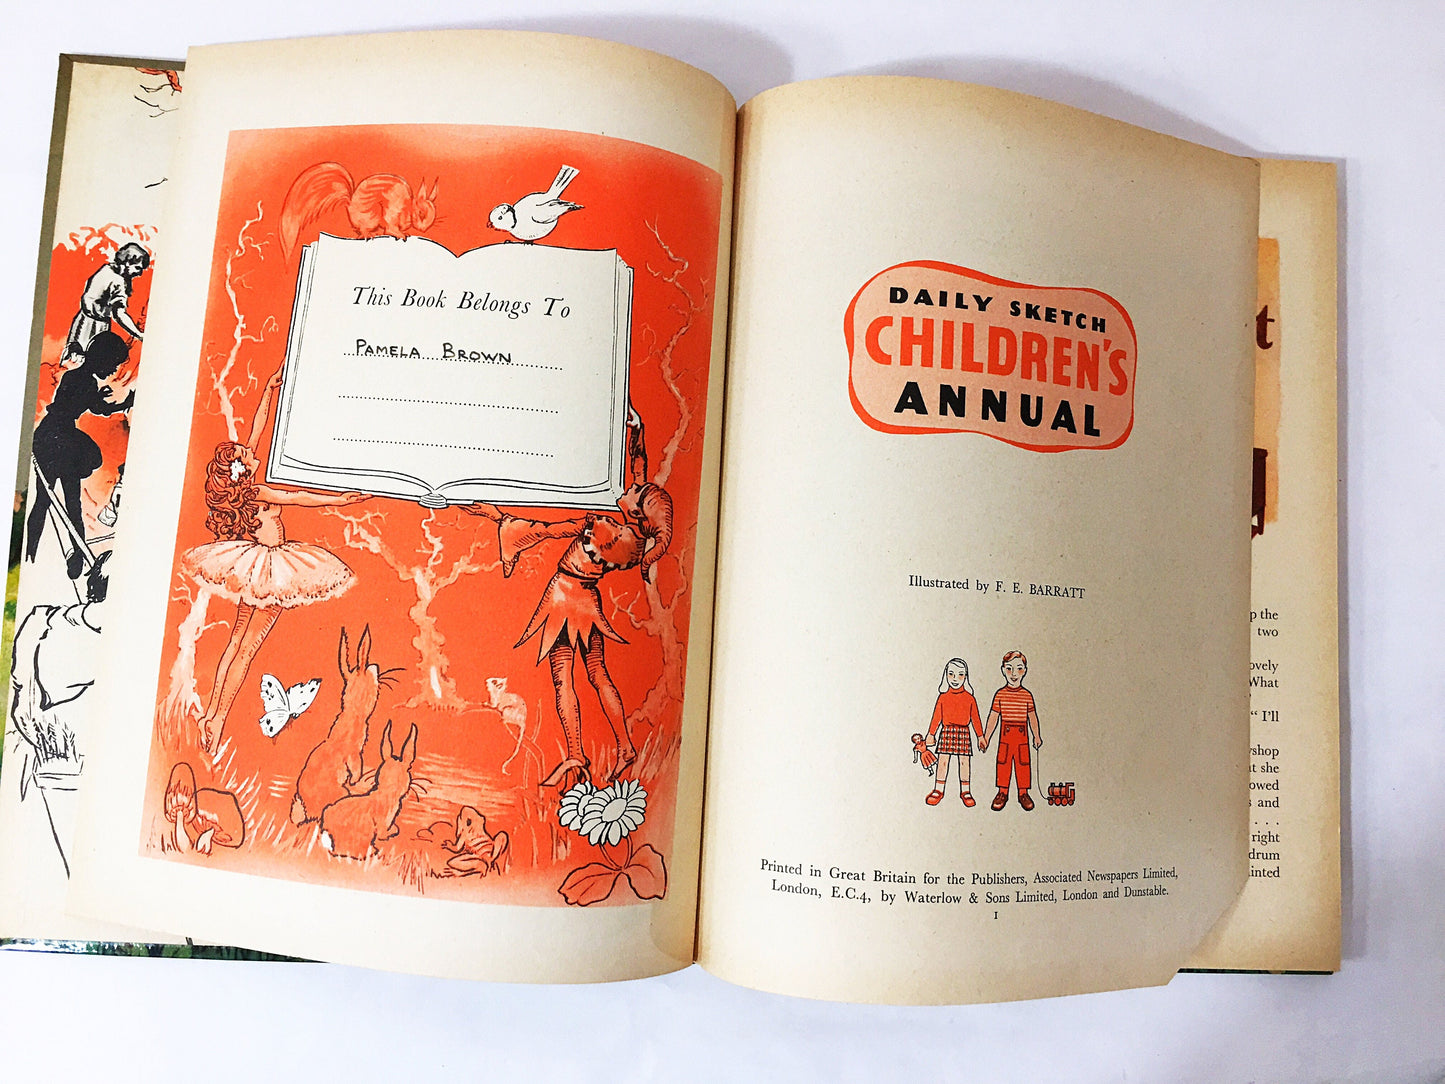 Jimmy's Journey Unlikely Adventures of a Little Giraffe' by Mary Dewing Daily Sketch Children's Annual vintage children's book circa 1950